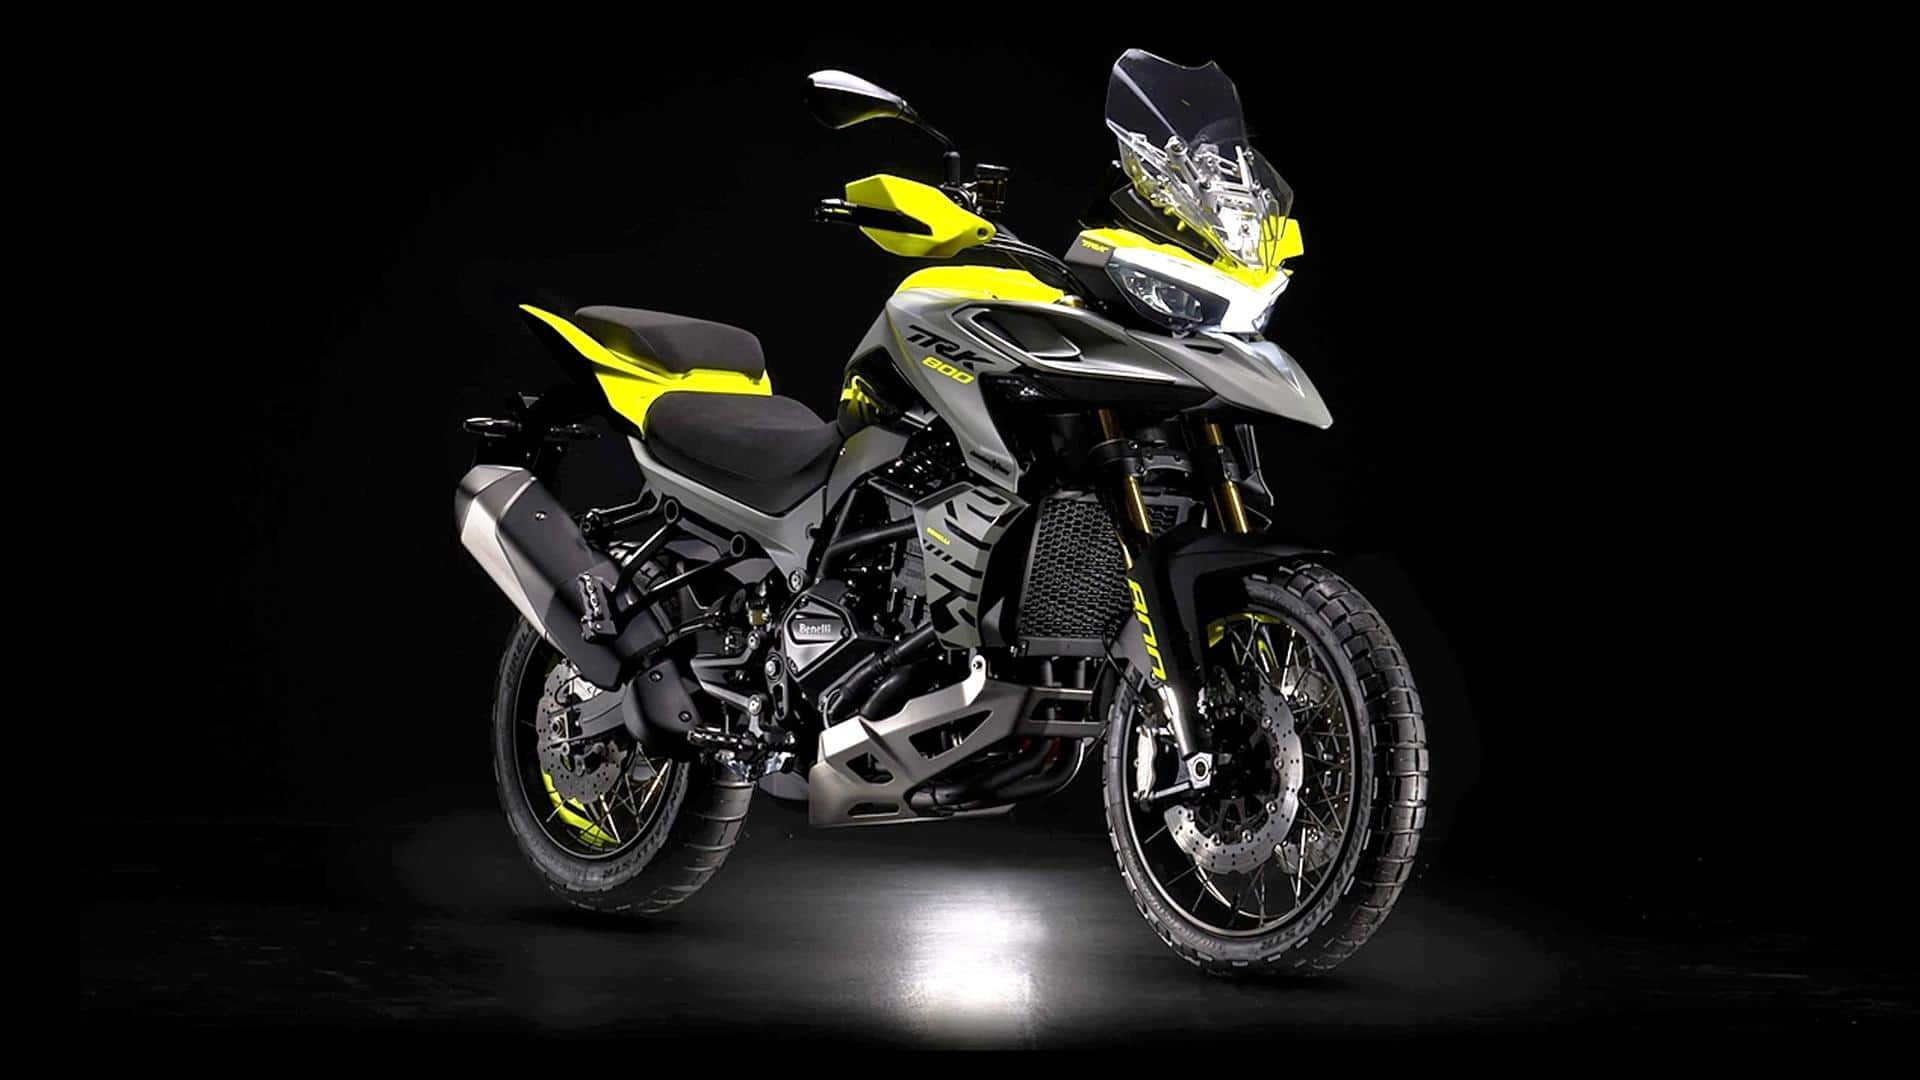 2022 Benelli TRK 800 arrives with stunning looks: Check features